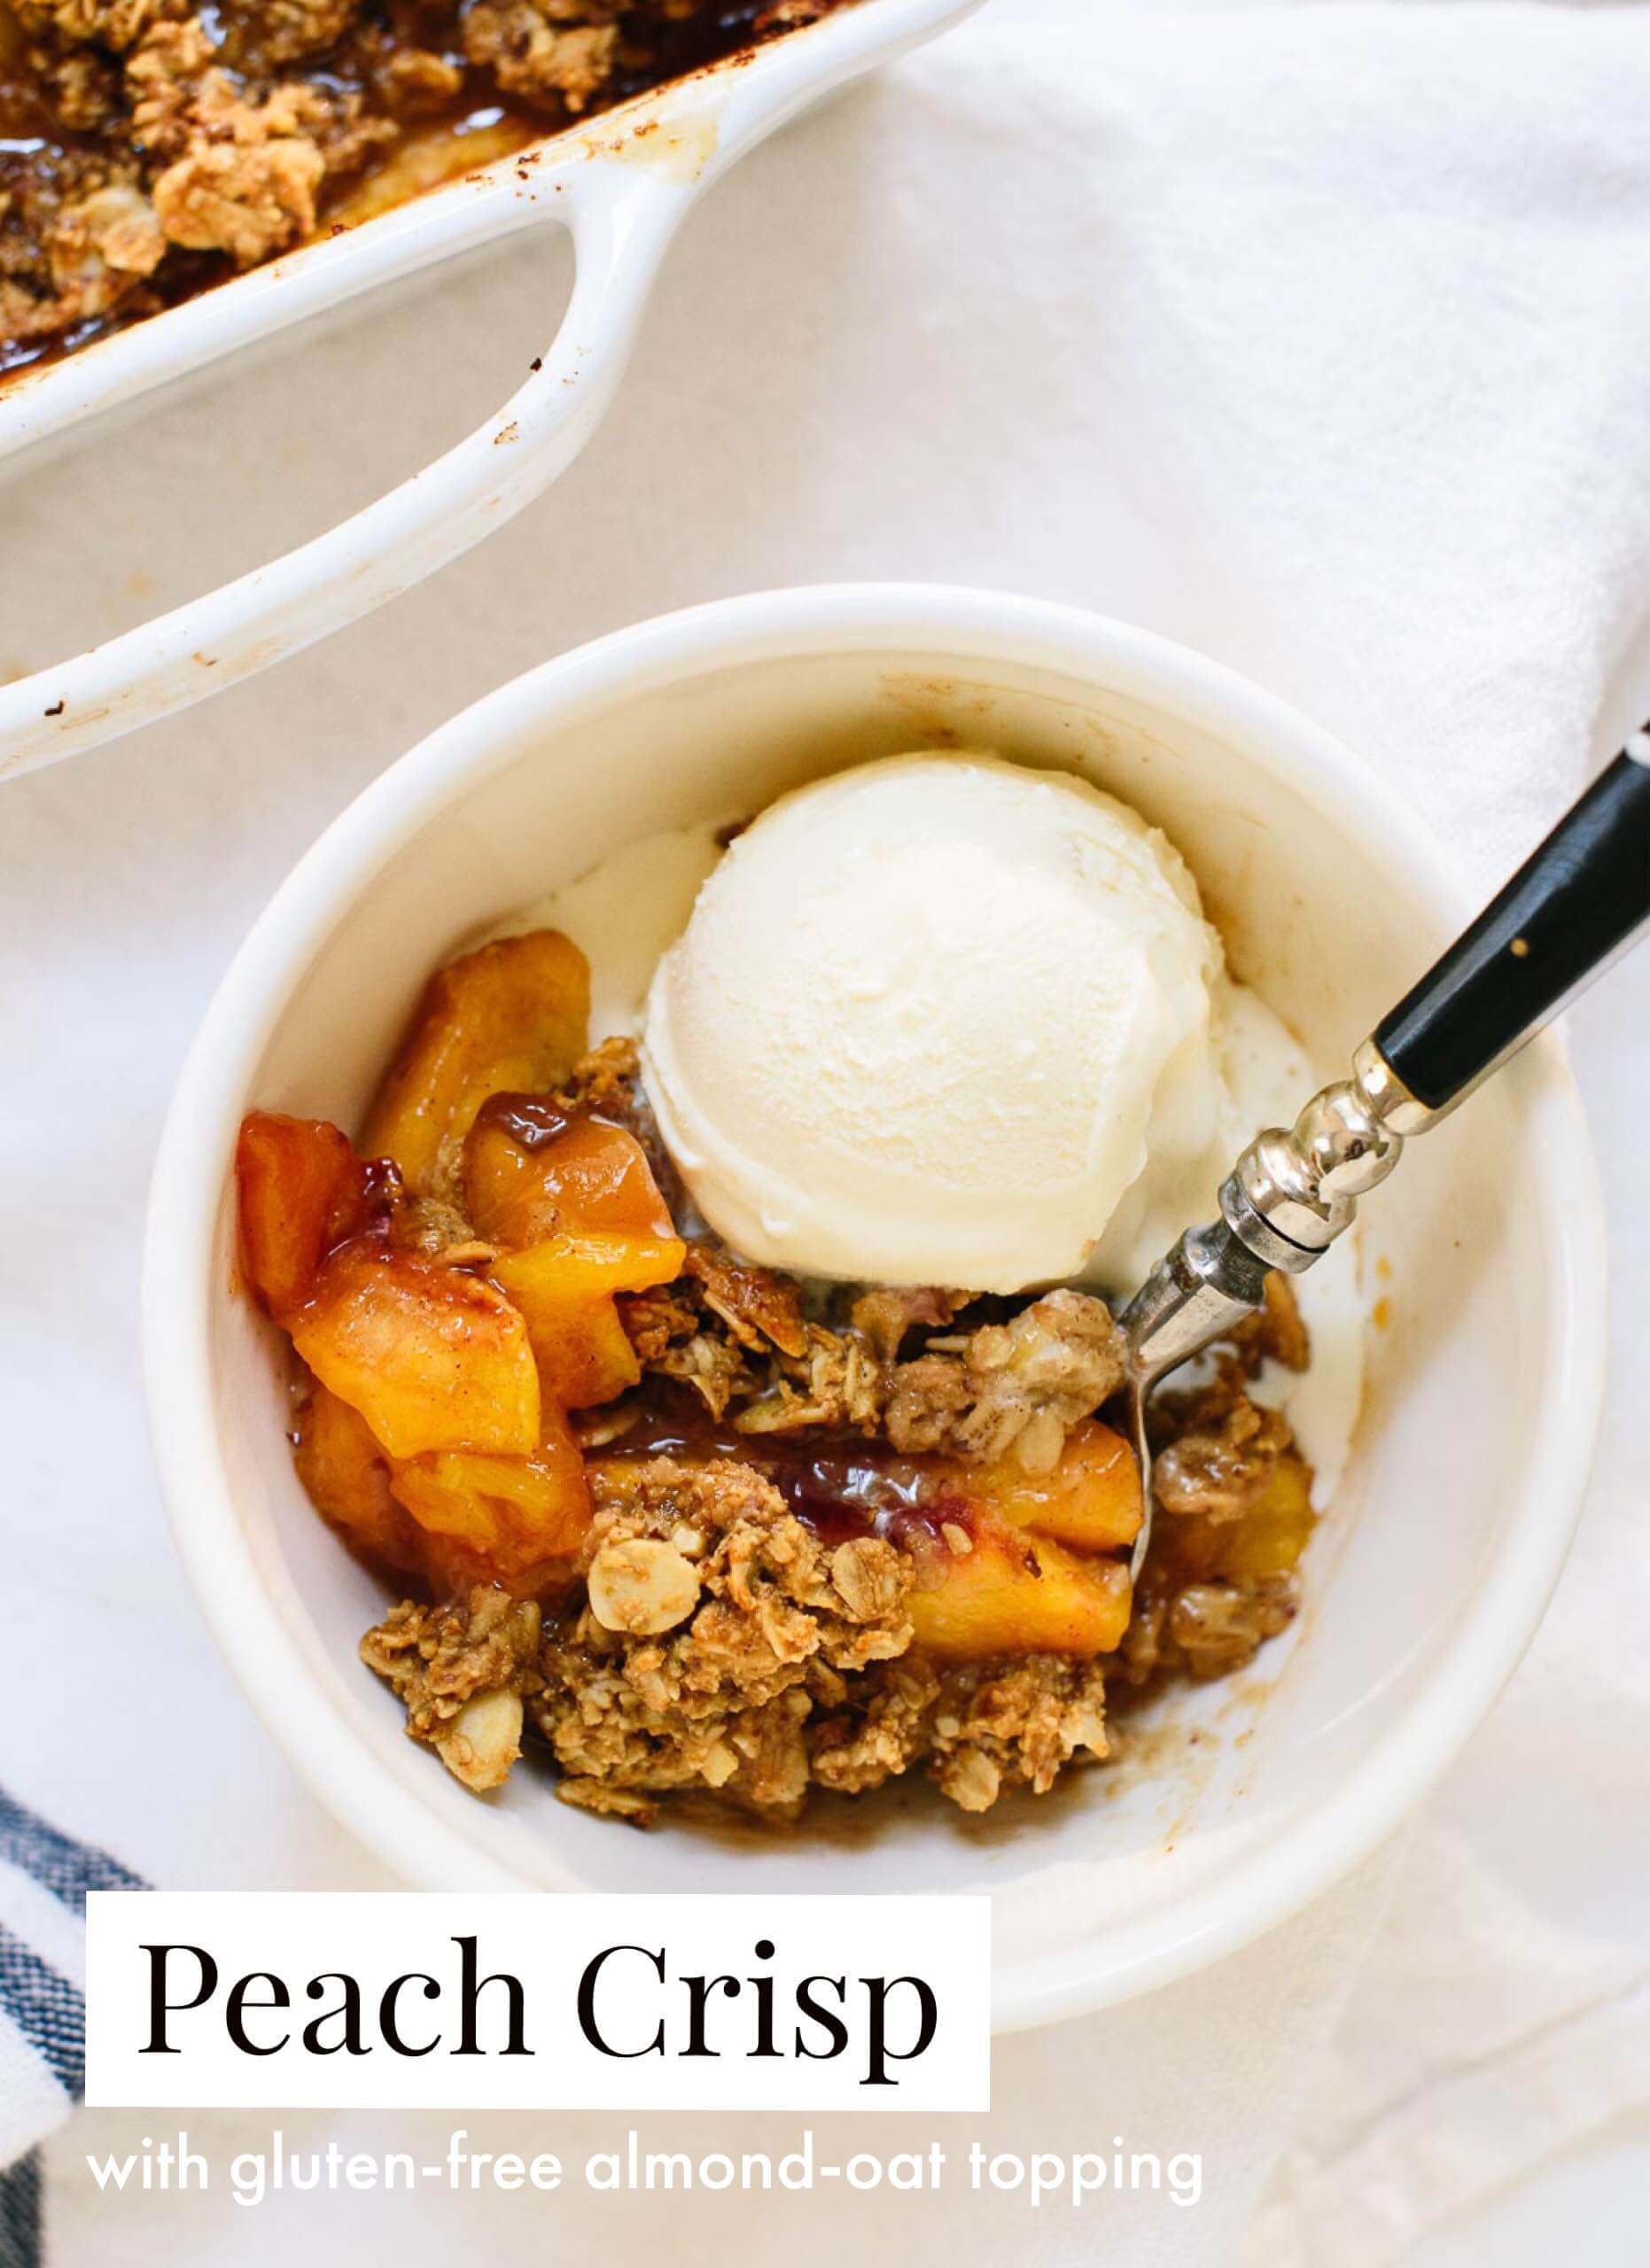 This peach crisp recipe is made with ripe summer peaches, and topped with gluten-free almond-oat topping. Delicious! cookieandkate.com